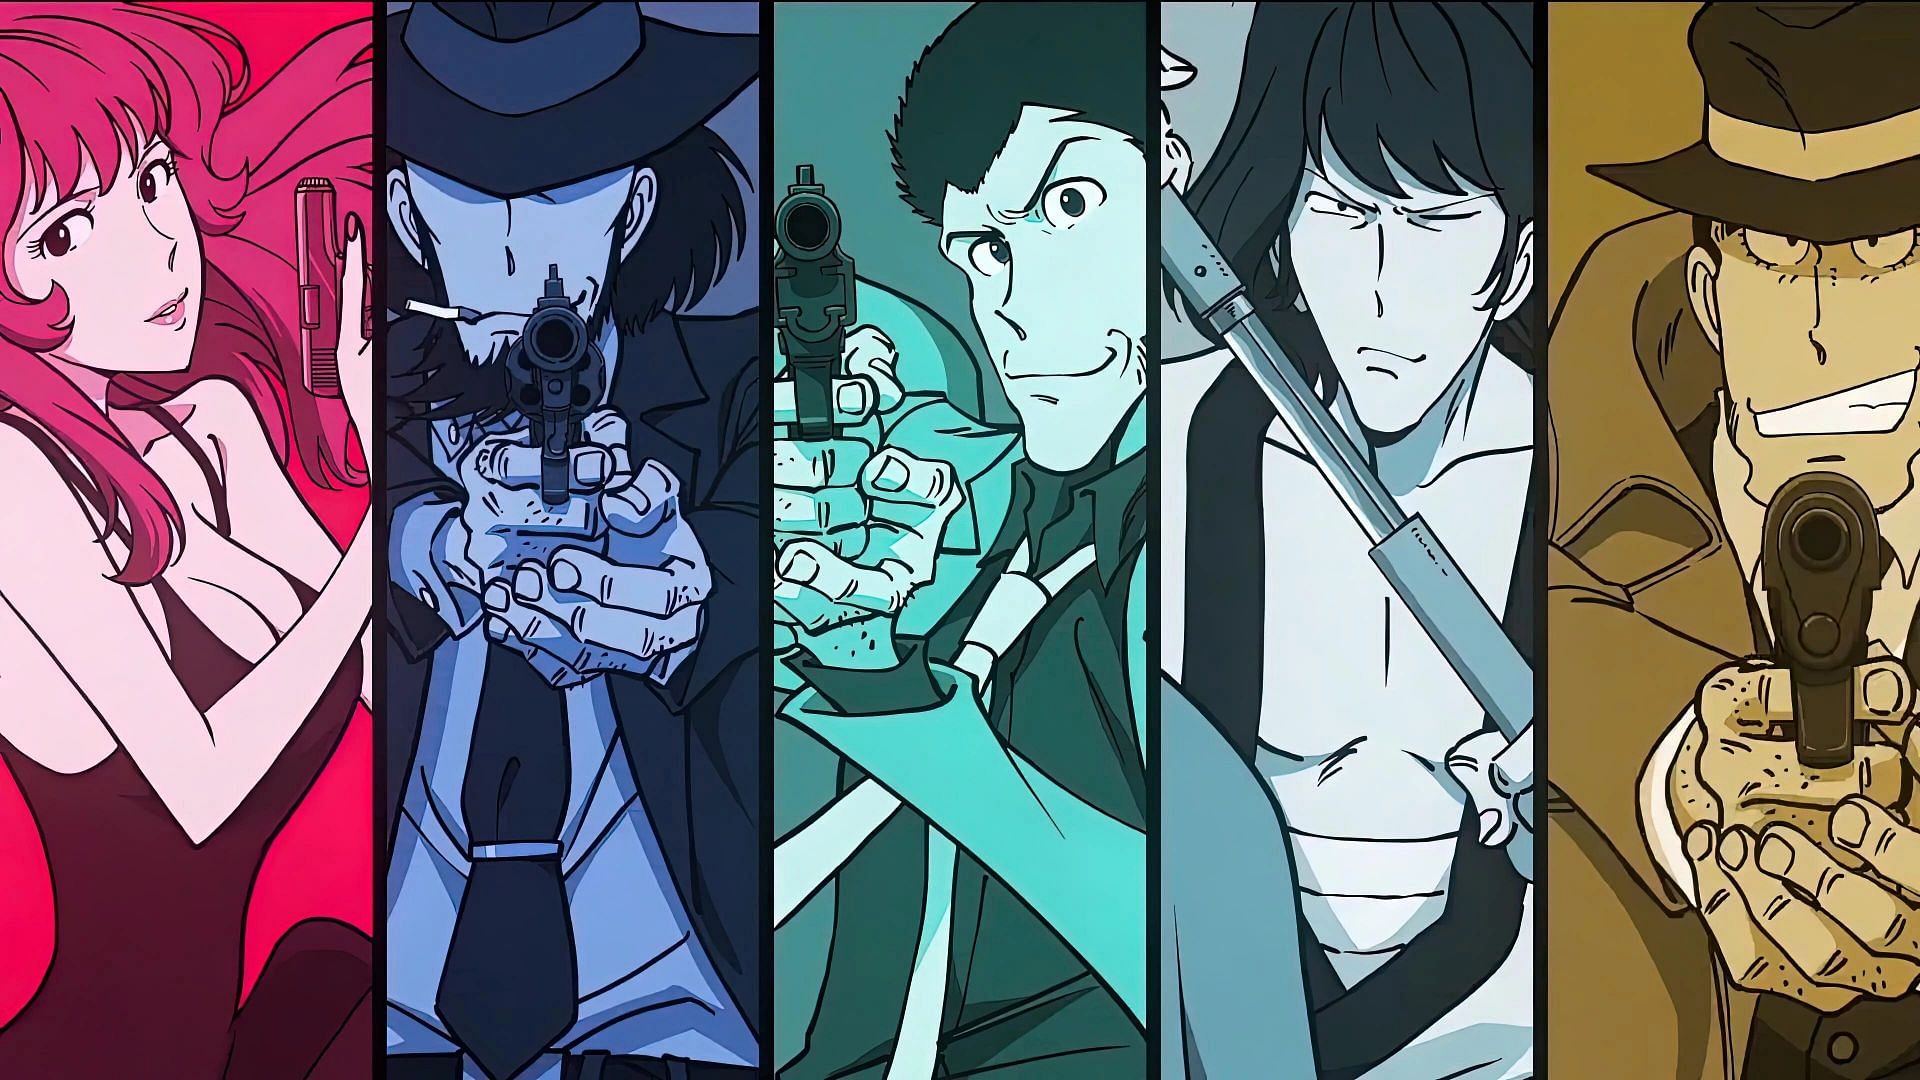 Lupin the Third Part 1 Gets a Stunning HD Remaster and New Dub